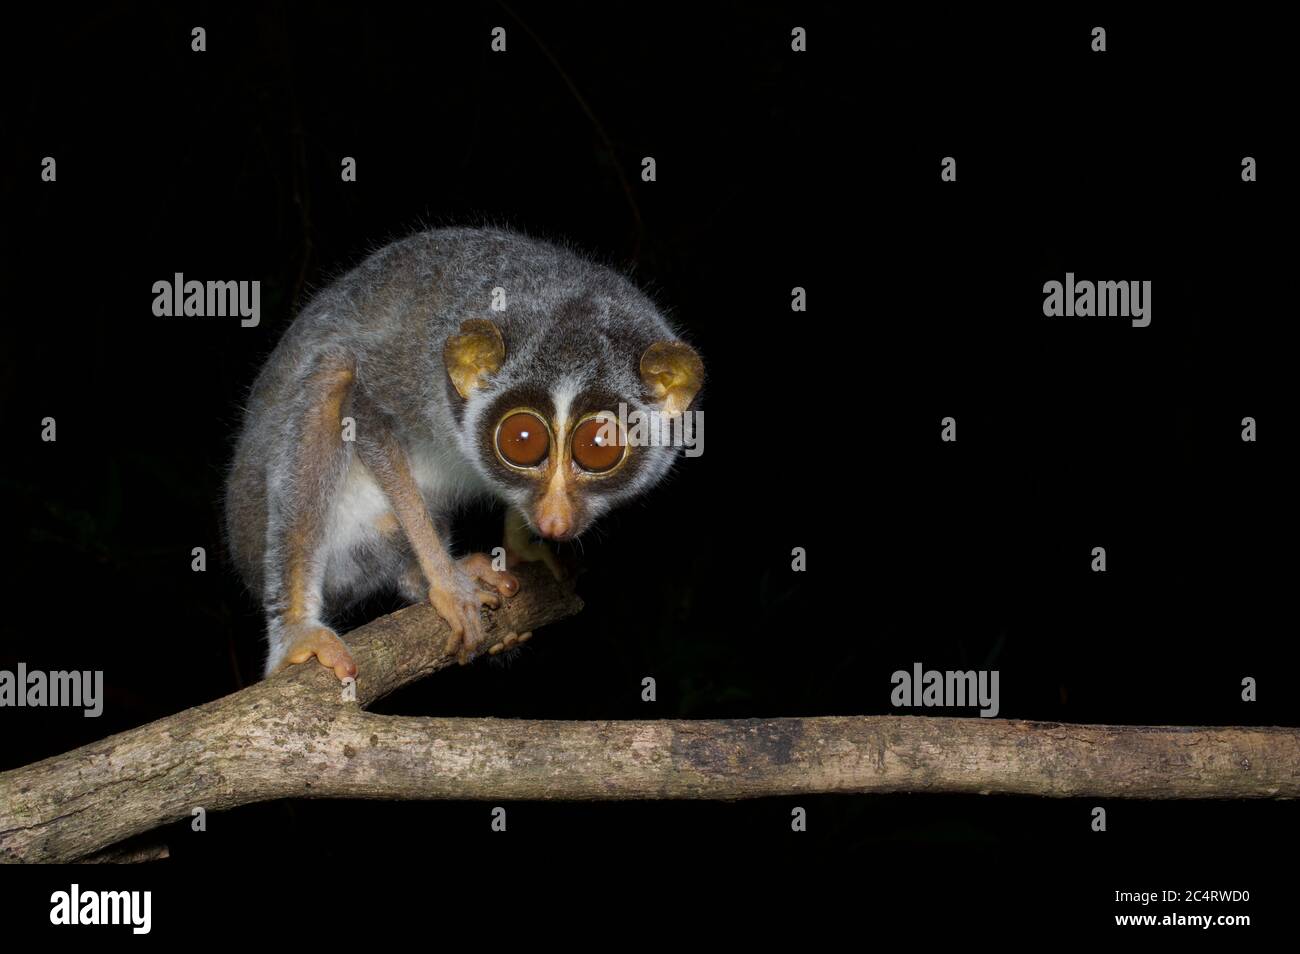 A cute, big-eyed Highlands Grey Slender Loris (Loris lydekkerianus grandis) on a thin branch at night in Knuckles Conservation Forest, Sri Lanka Stock Photo